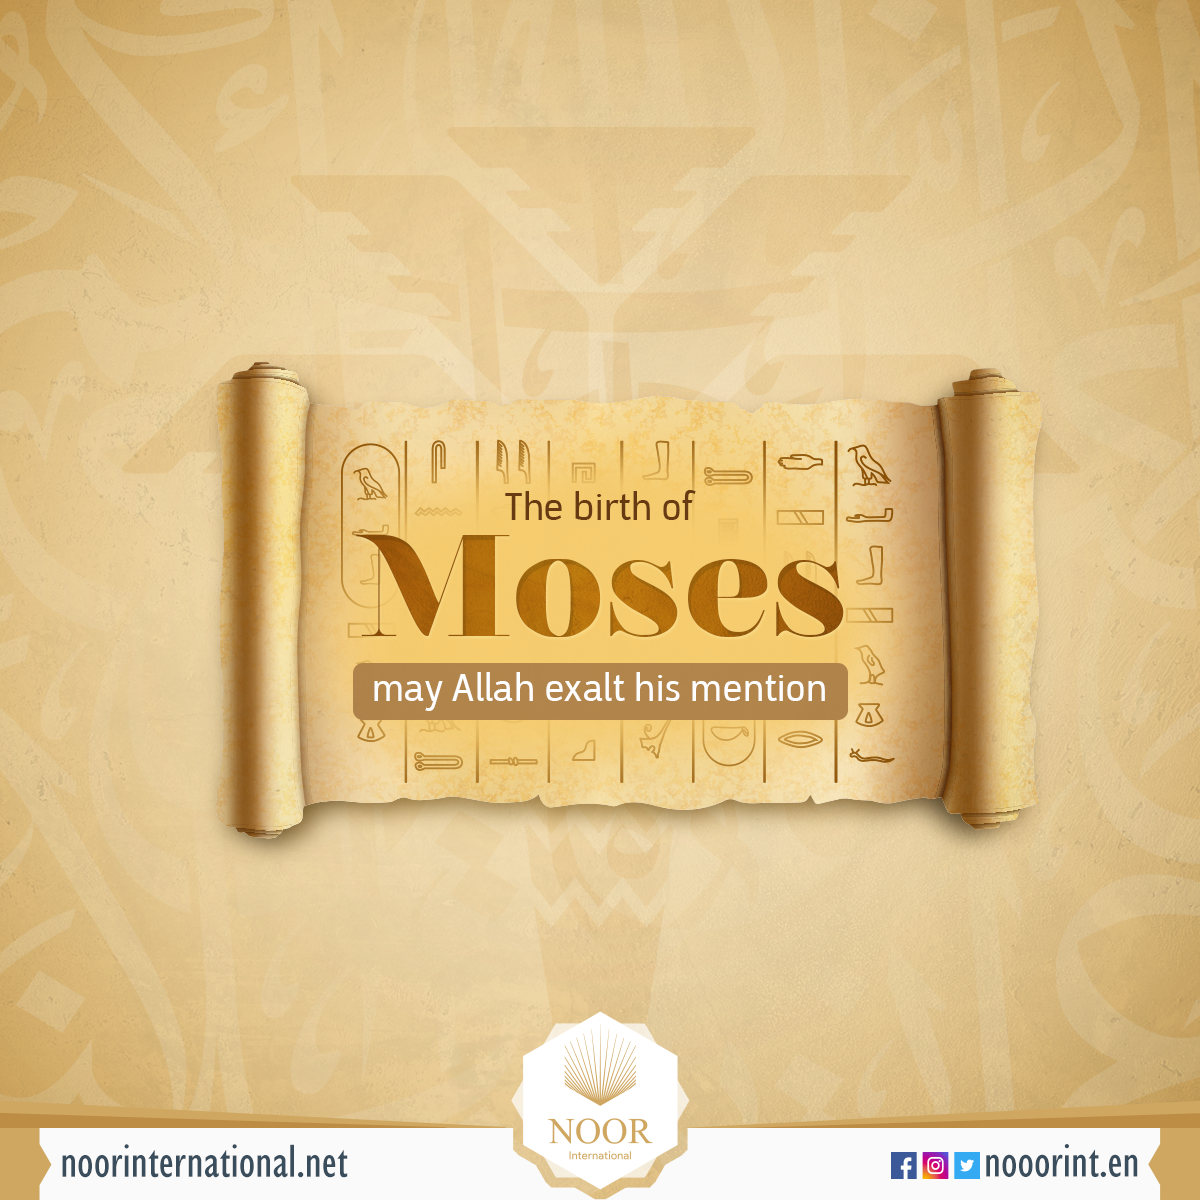 Moses in the Qur'an